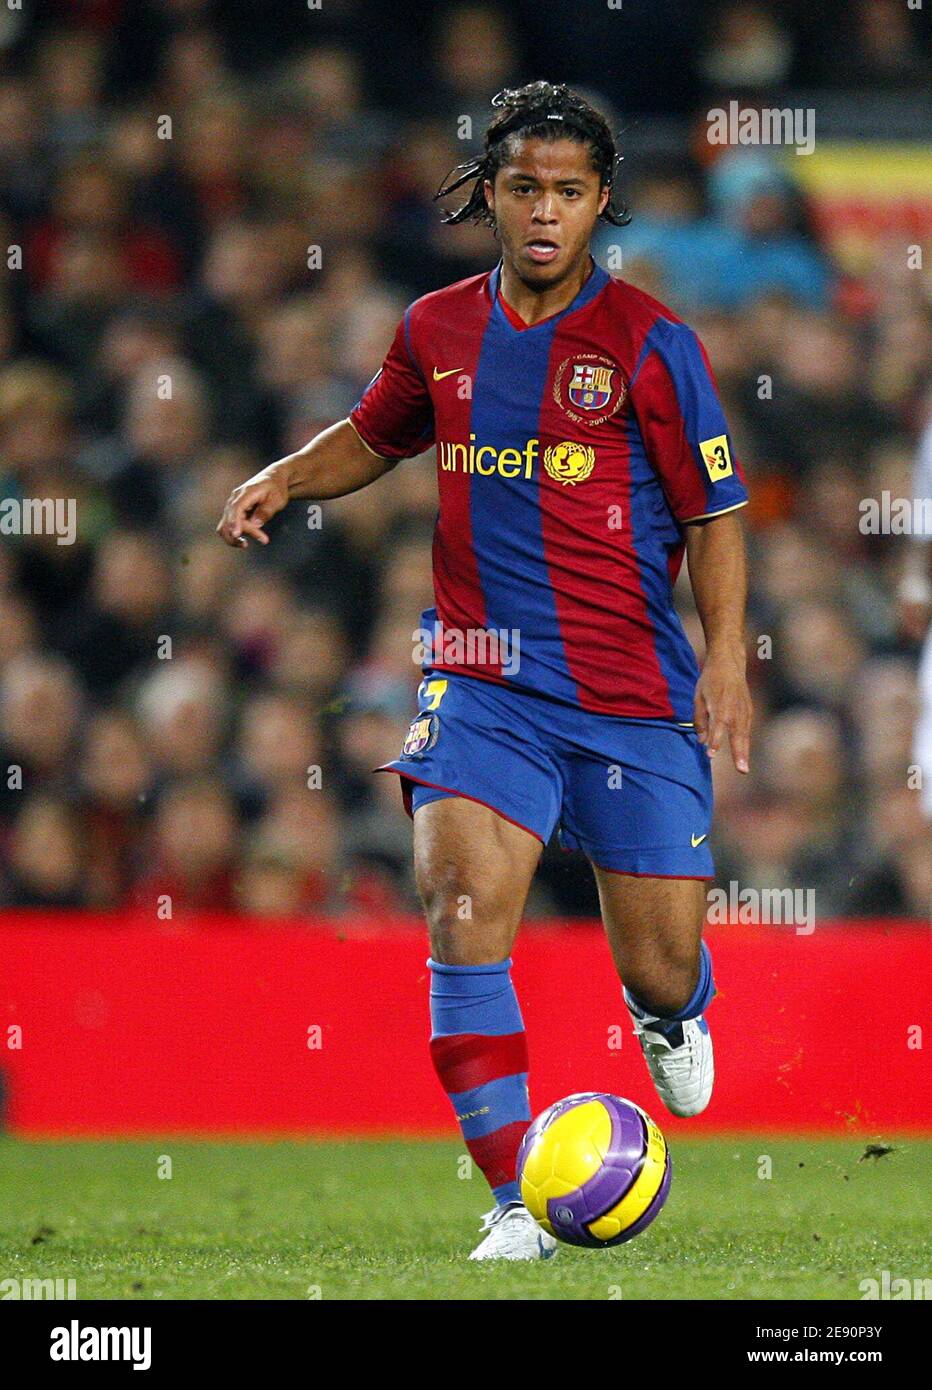 Barcelona's Dos Santos Giovani during the Spanish League soccer match, FC  Barcelona vs Real Madrid at the Camp Nou Stadium in Barcelona, Spain on  December 23, 2007. Real Madrid won 1-0. Photo